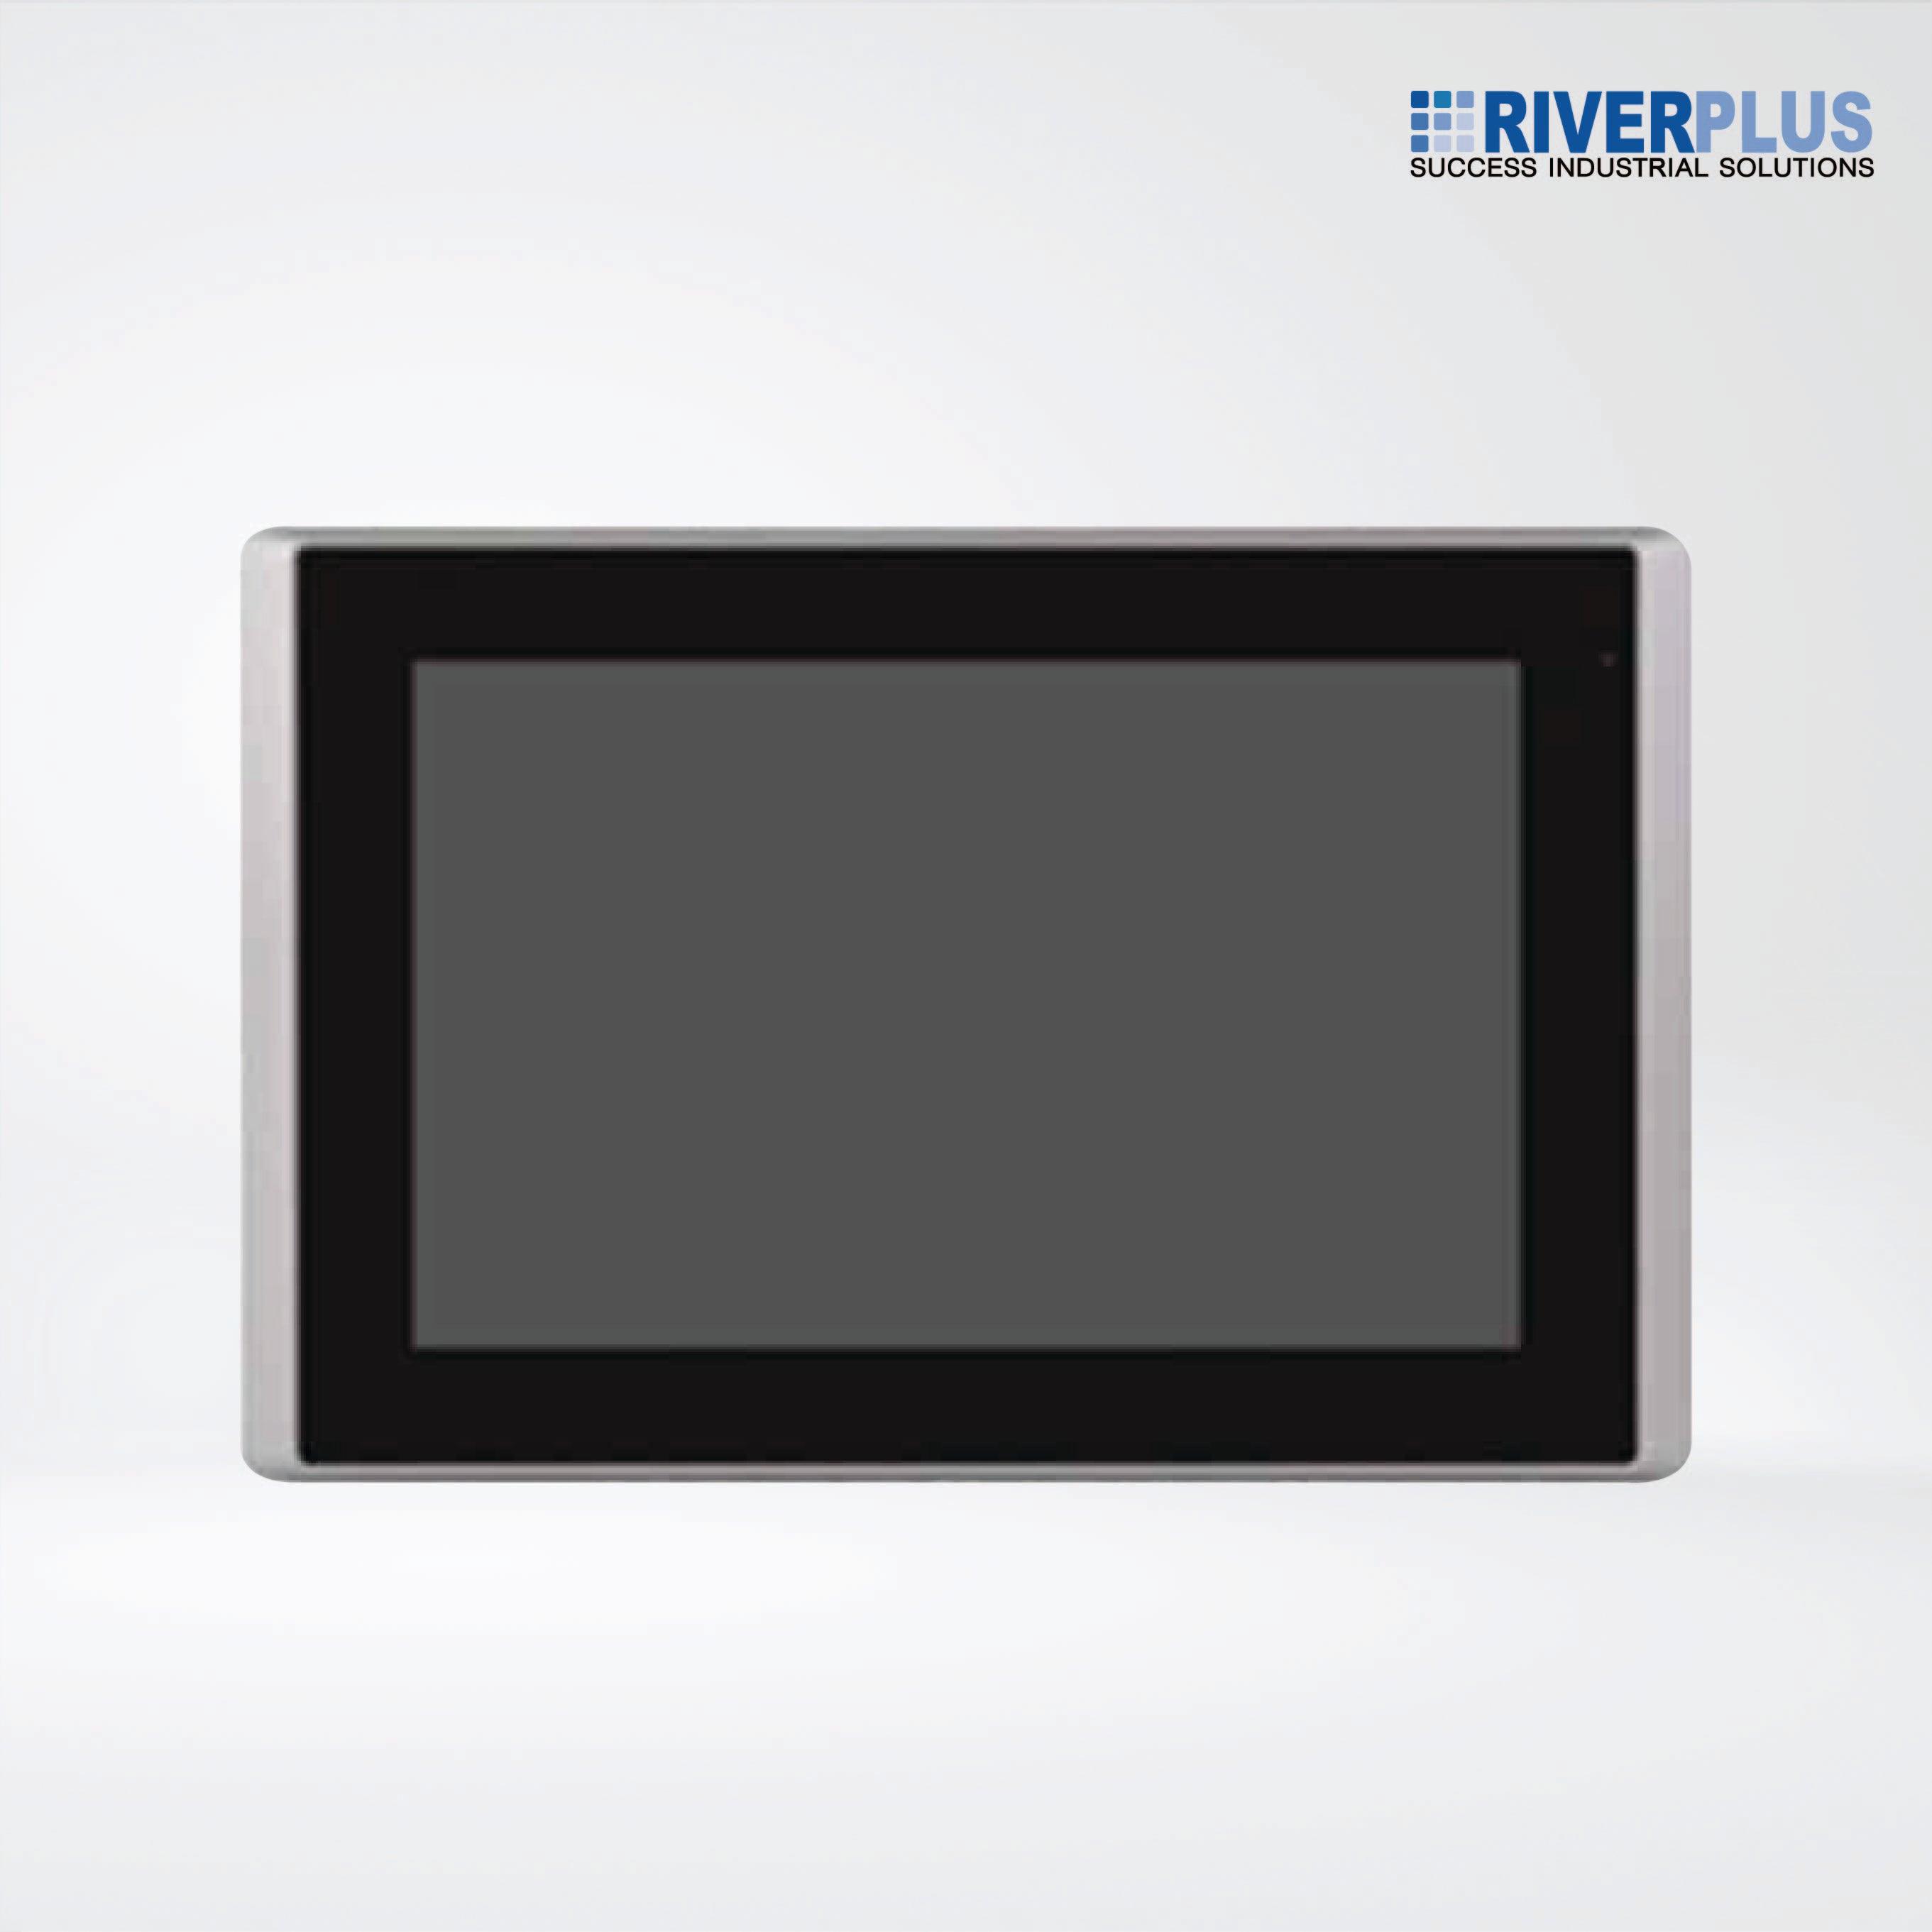 ARCHMI-810 New Generation Low Power Consumption HMI/Innovationg Fast, Bay Trail Solution - Riverplus